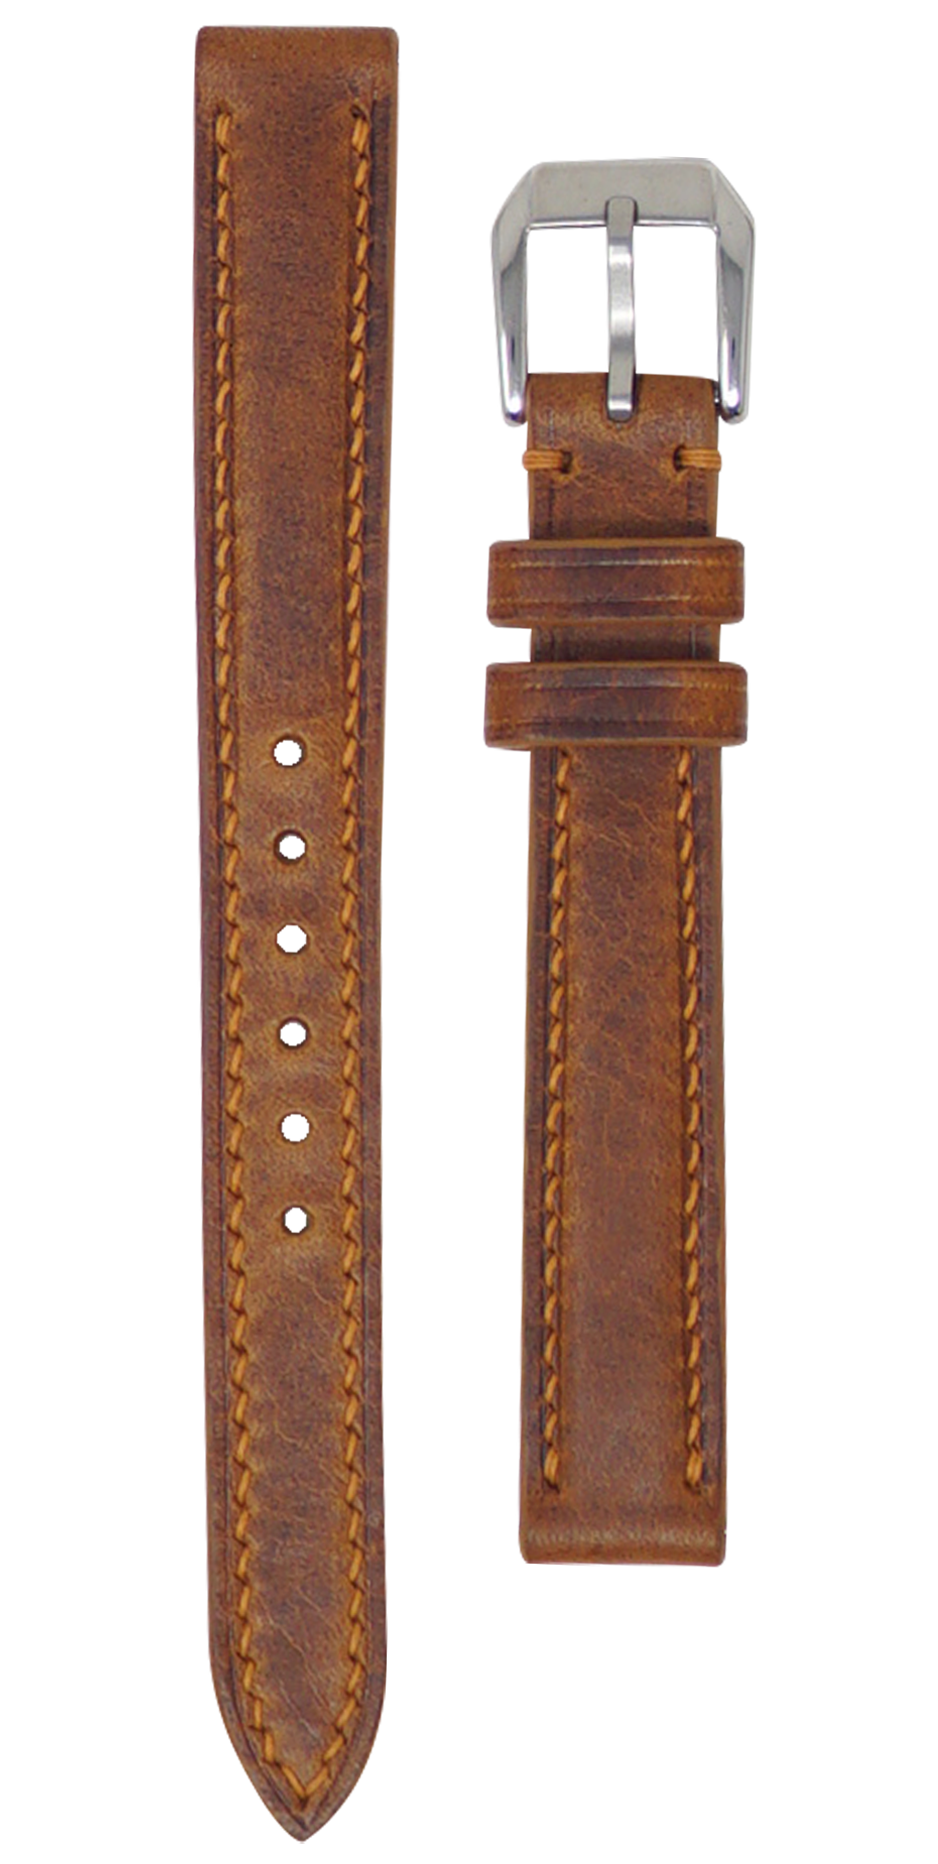 13mm Watch Strap - Quick Release